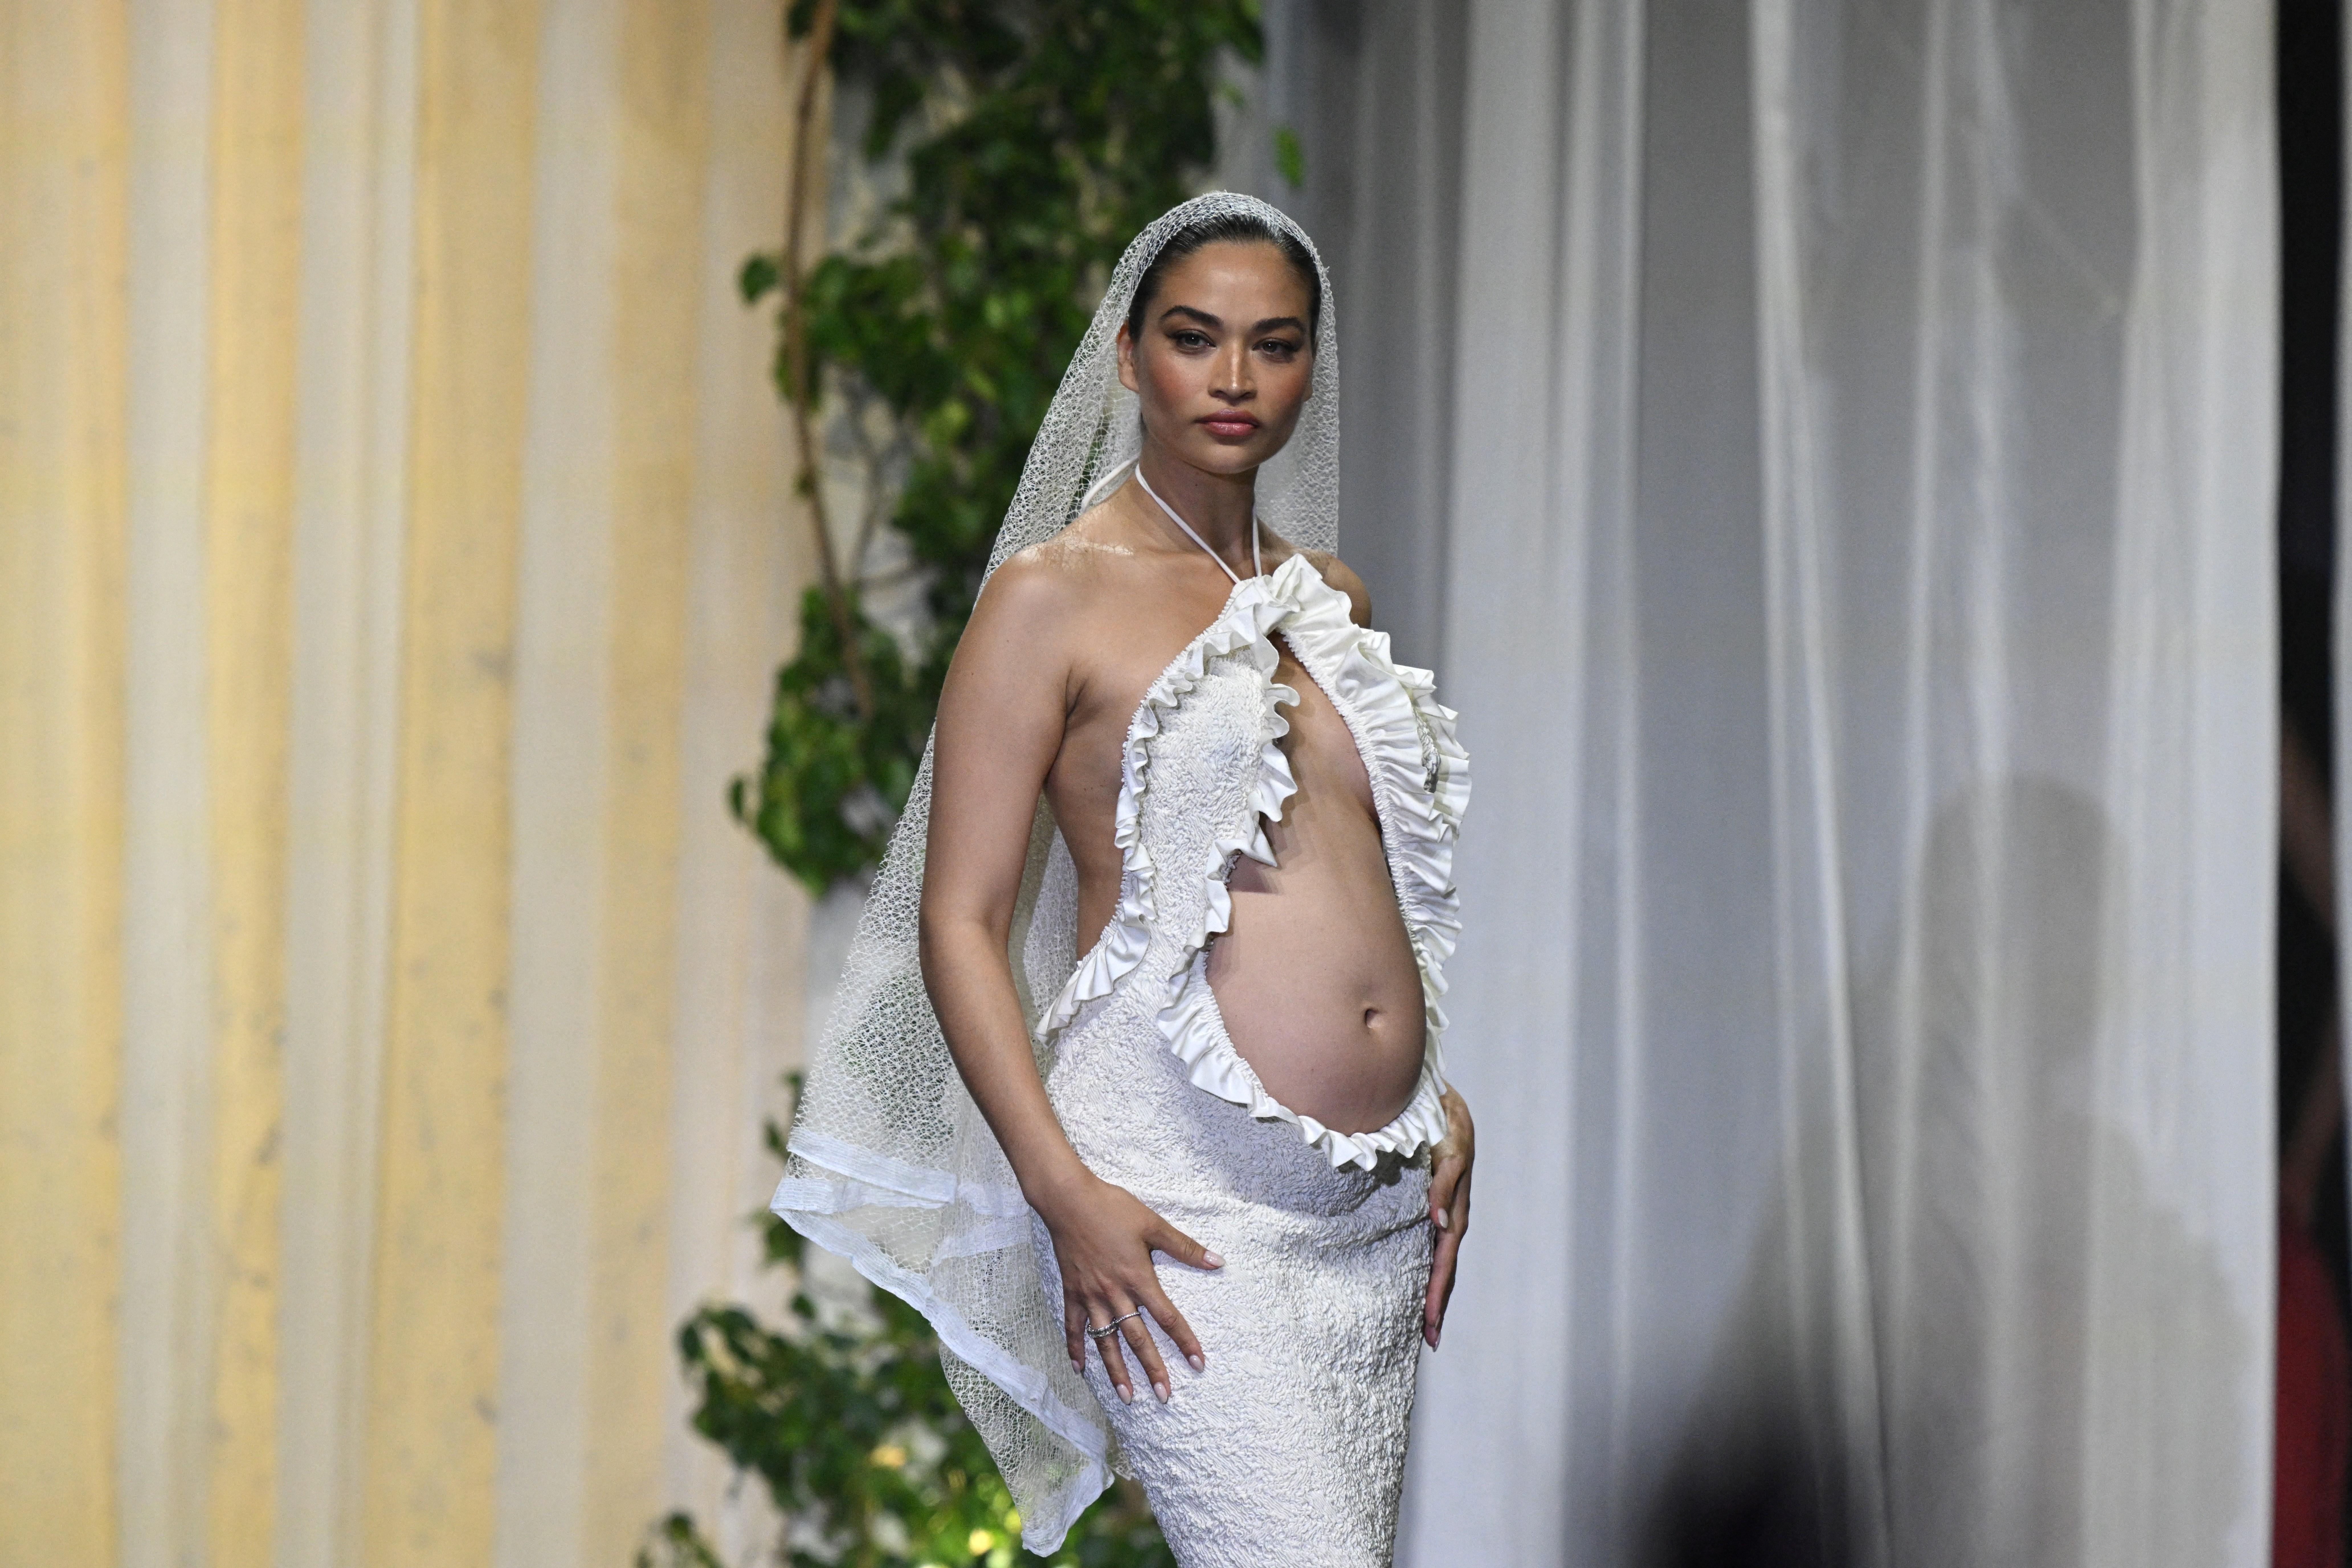 Shanina shaik presents an outfit to be auctioned off on May 26, 2022 during the annual amfAR Cinema Against AIDS Cannes Gala at the Hotel du Cap-Eden-Roc in Cap d'Antibes, southern France, on the sidelines of the 75th Cannes Film Festival. (Photo by Stefano Rellandini/AFP)